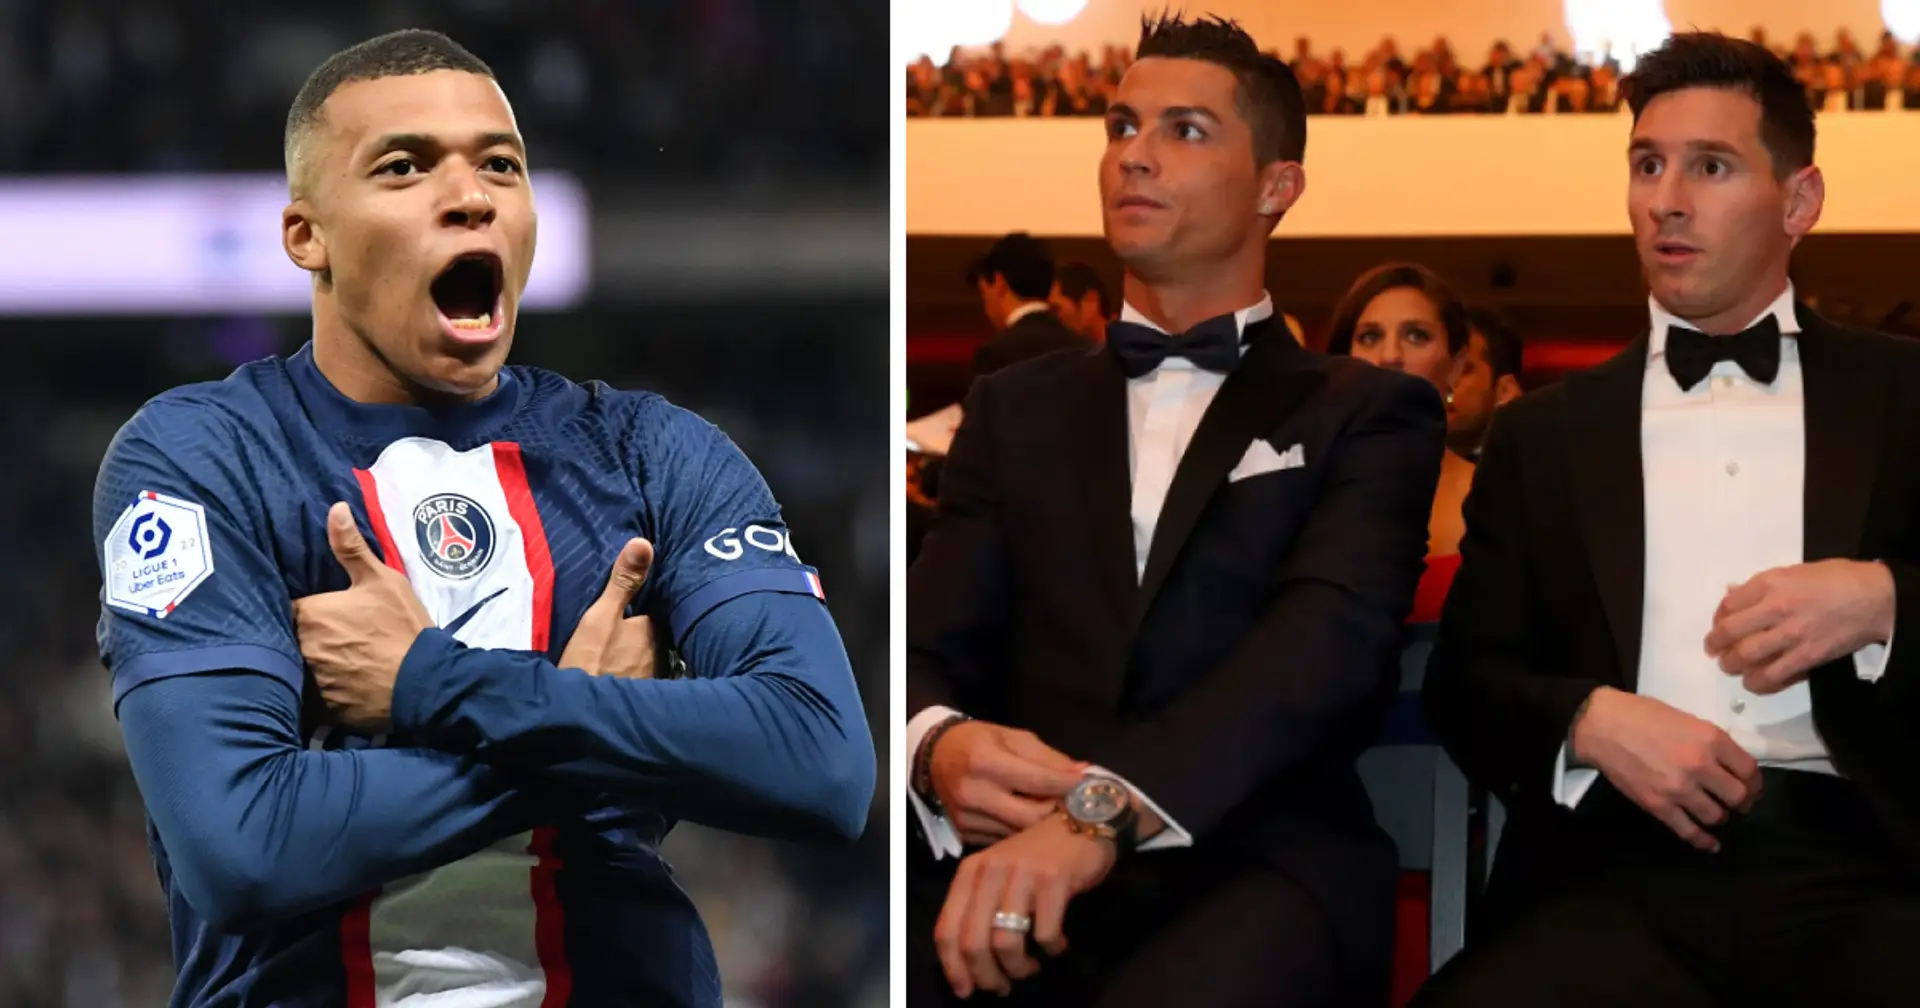 Kylian Mbappe matches another record set by Ronaldo and Messi